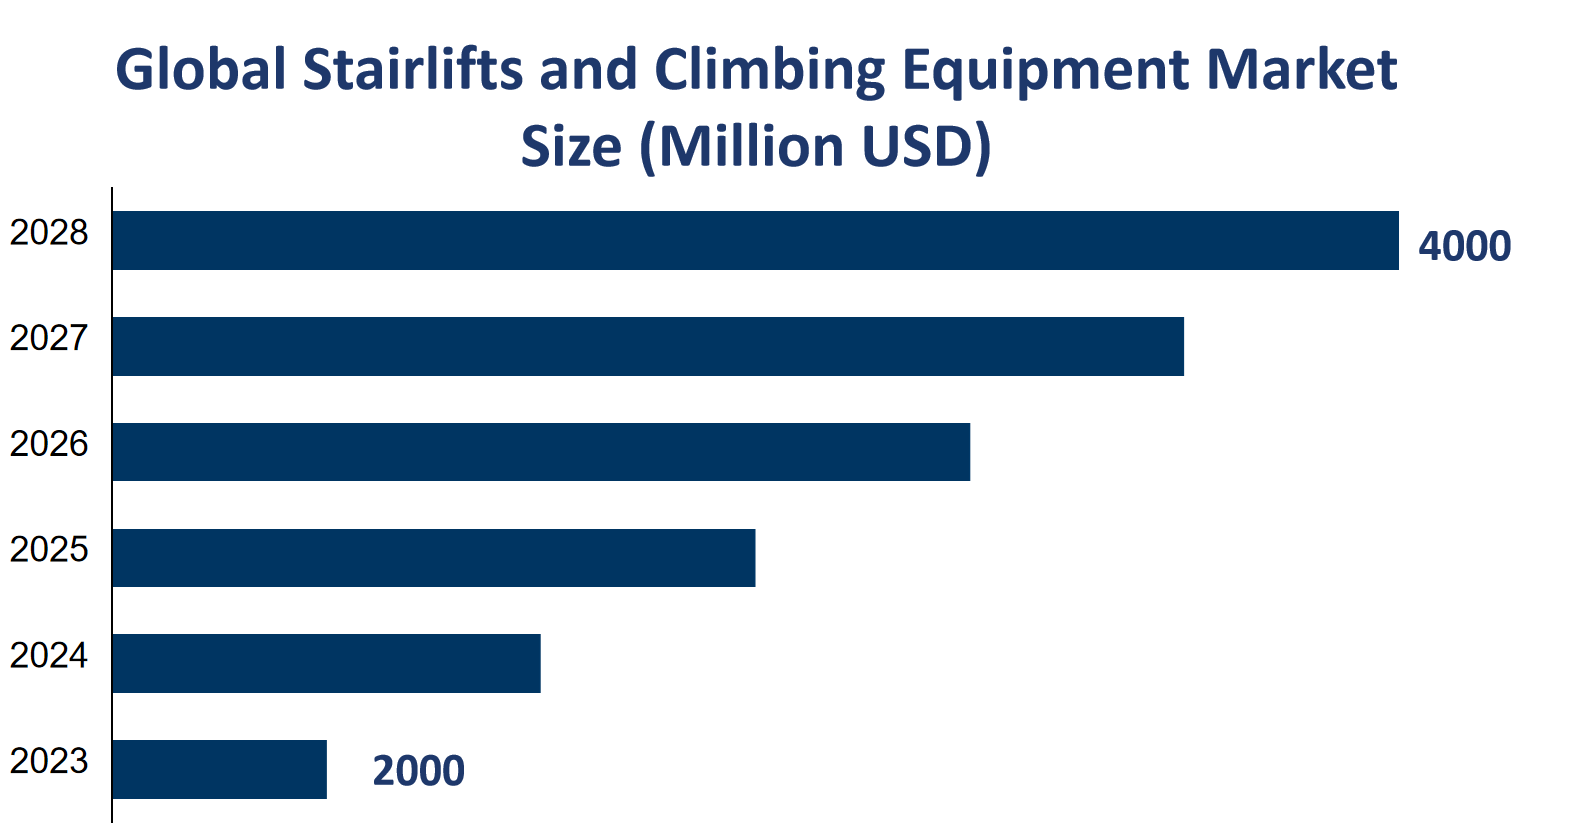 Global Stairlifts and Climbing Equipment Market Size (Million USD) 